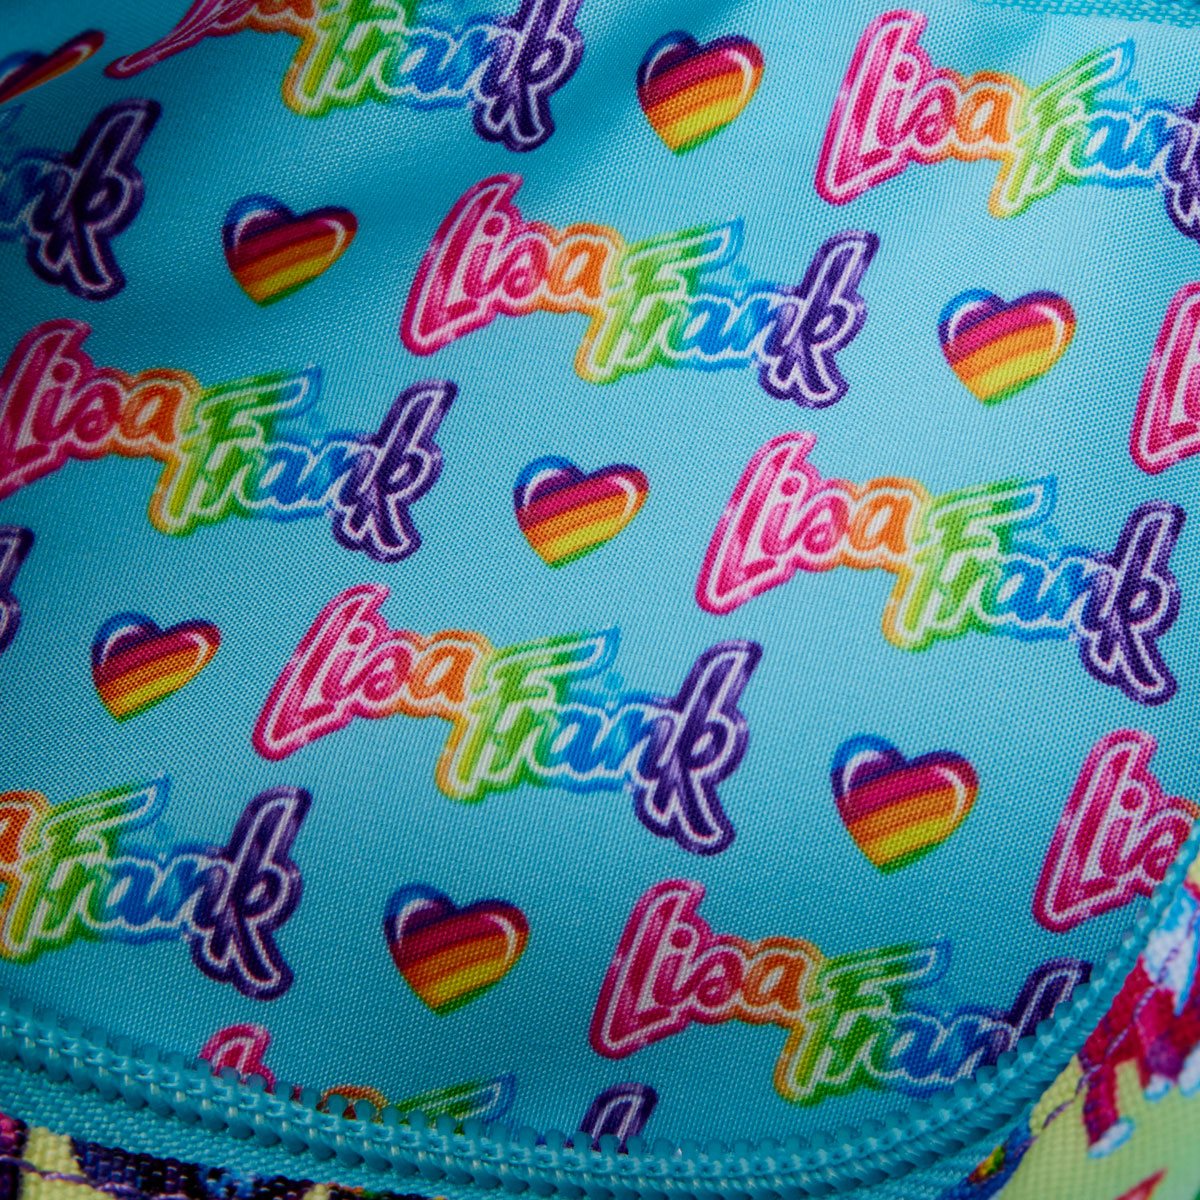 Lisa Frank Characters Pouch - Entertainment Earth